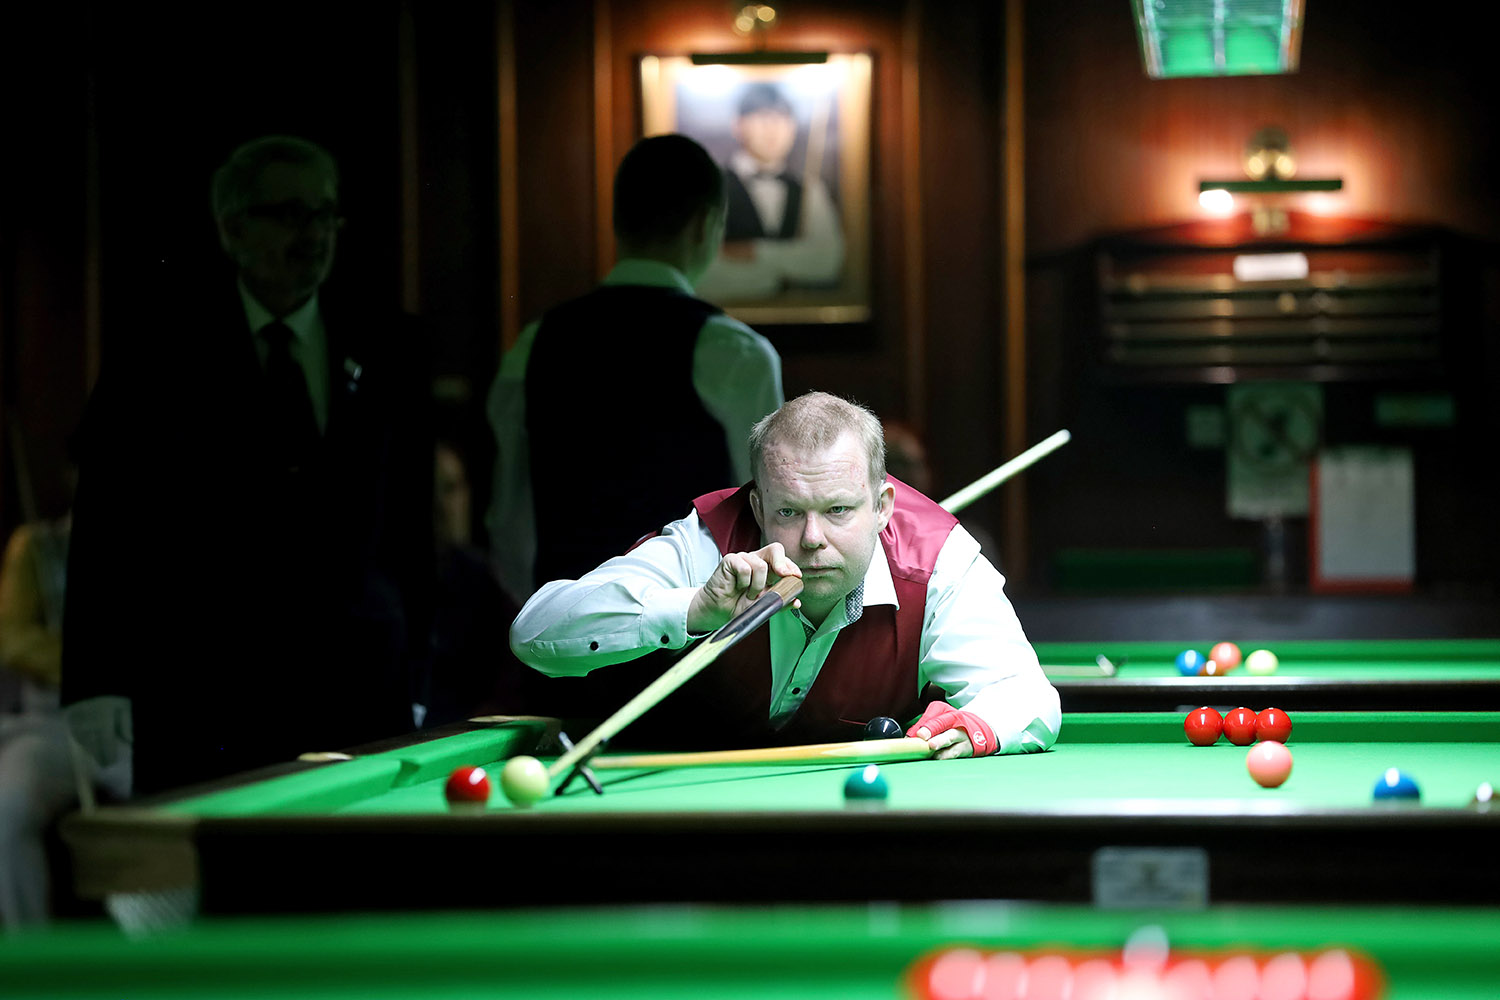 David Grant players snooker shot with rest